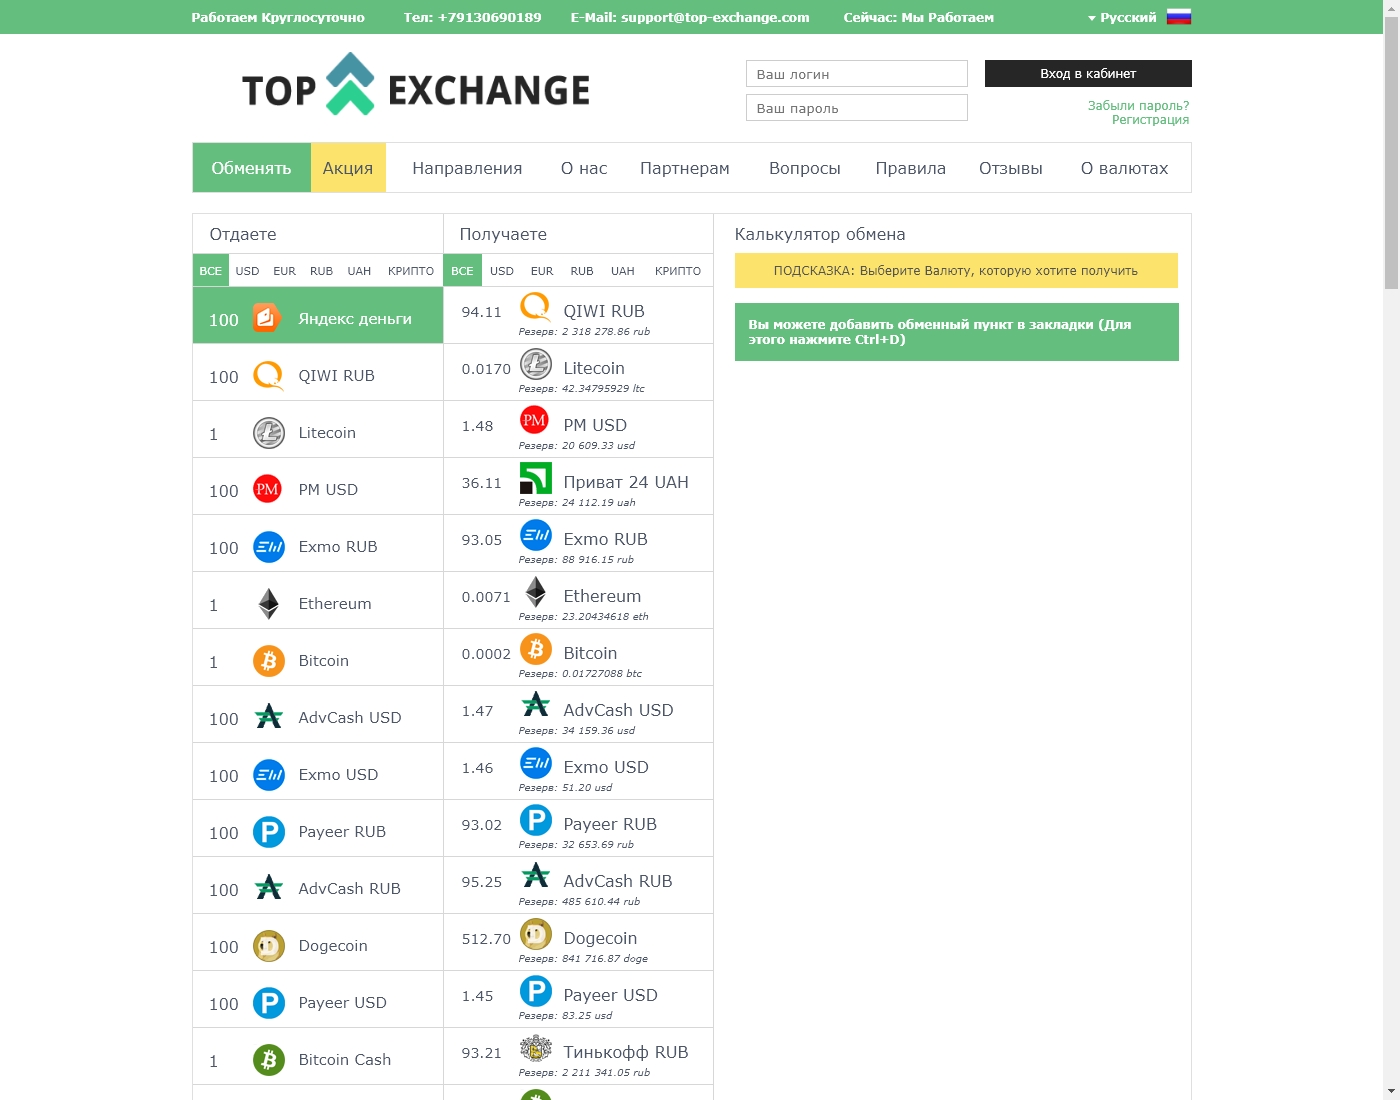 top-exchange user interface: the home page in English